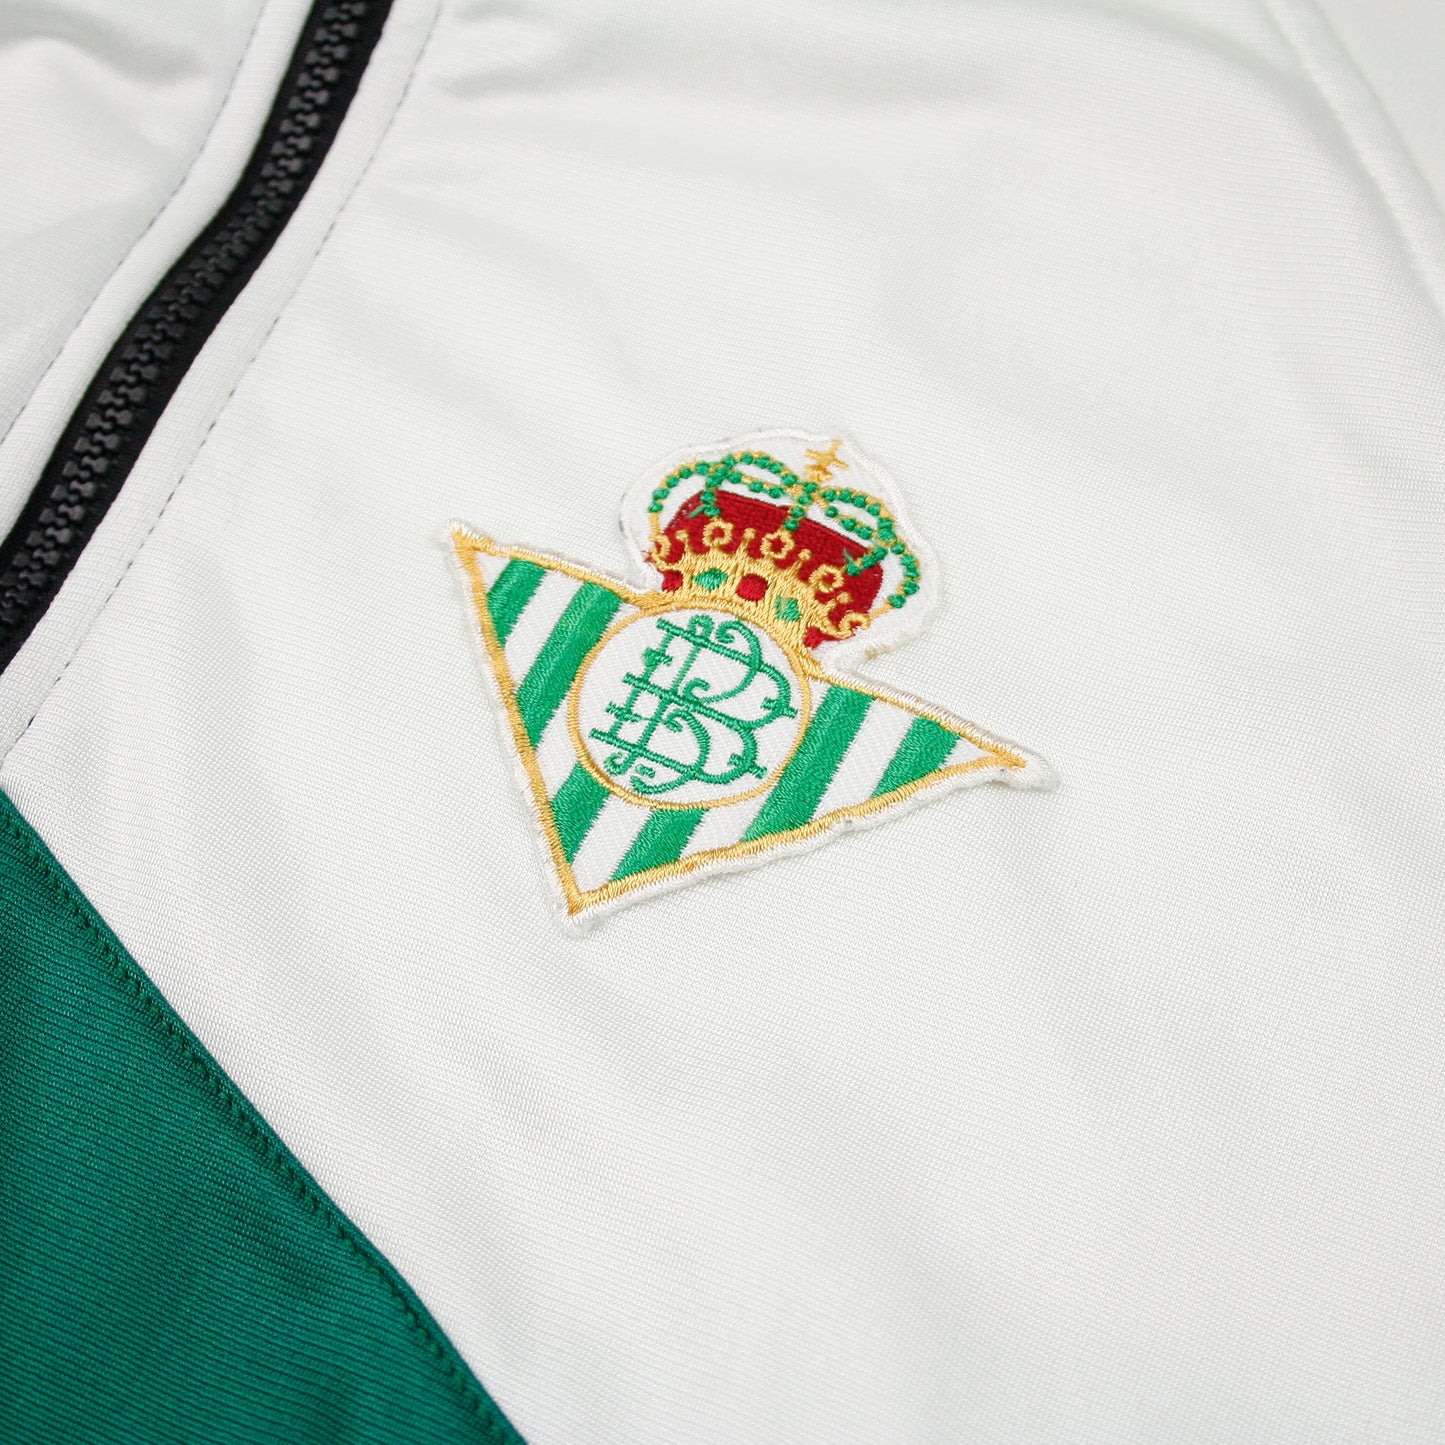 Real Betis 95/97 • Chándal Completo • L